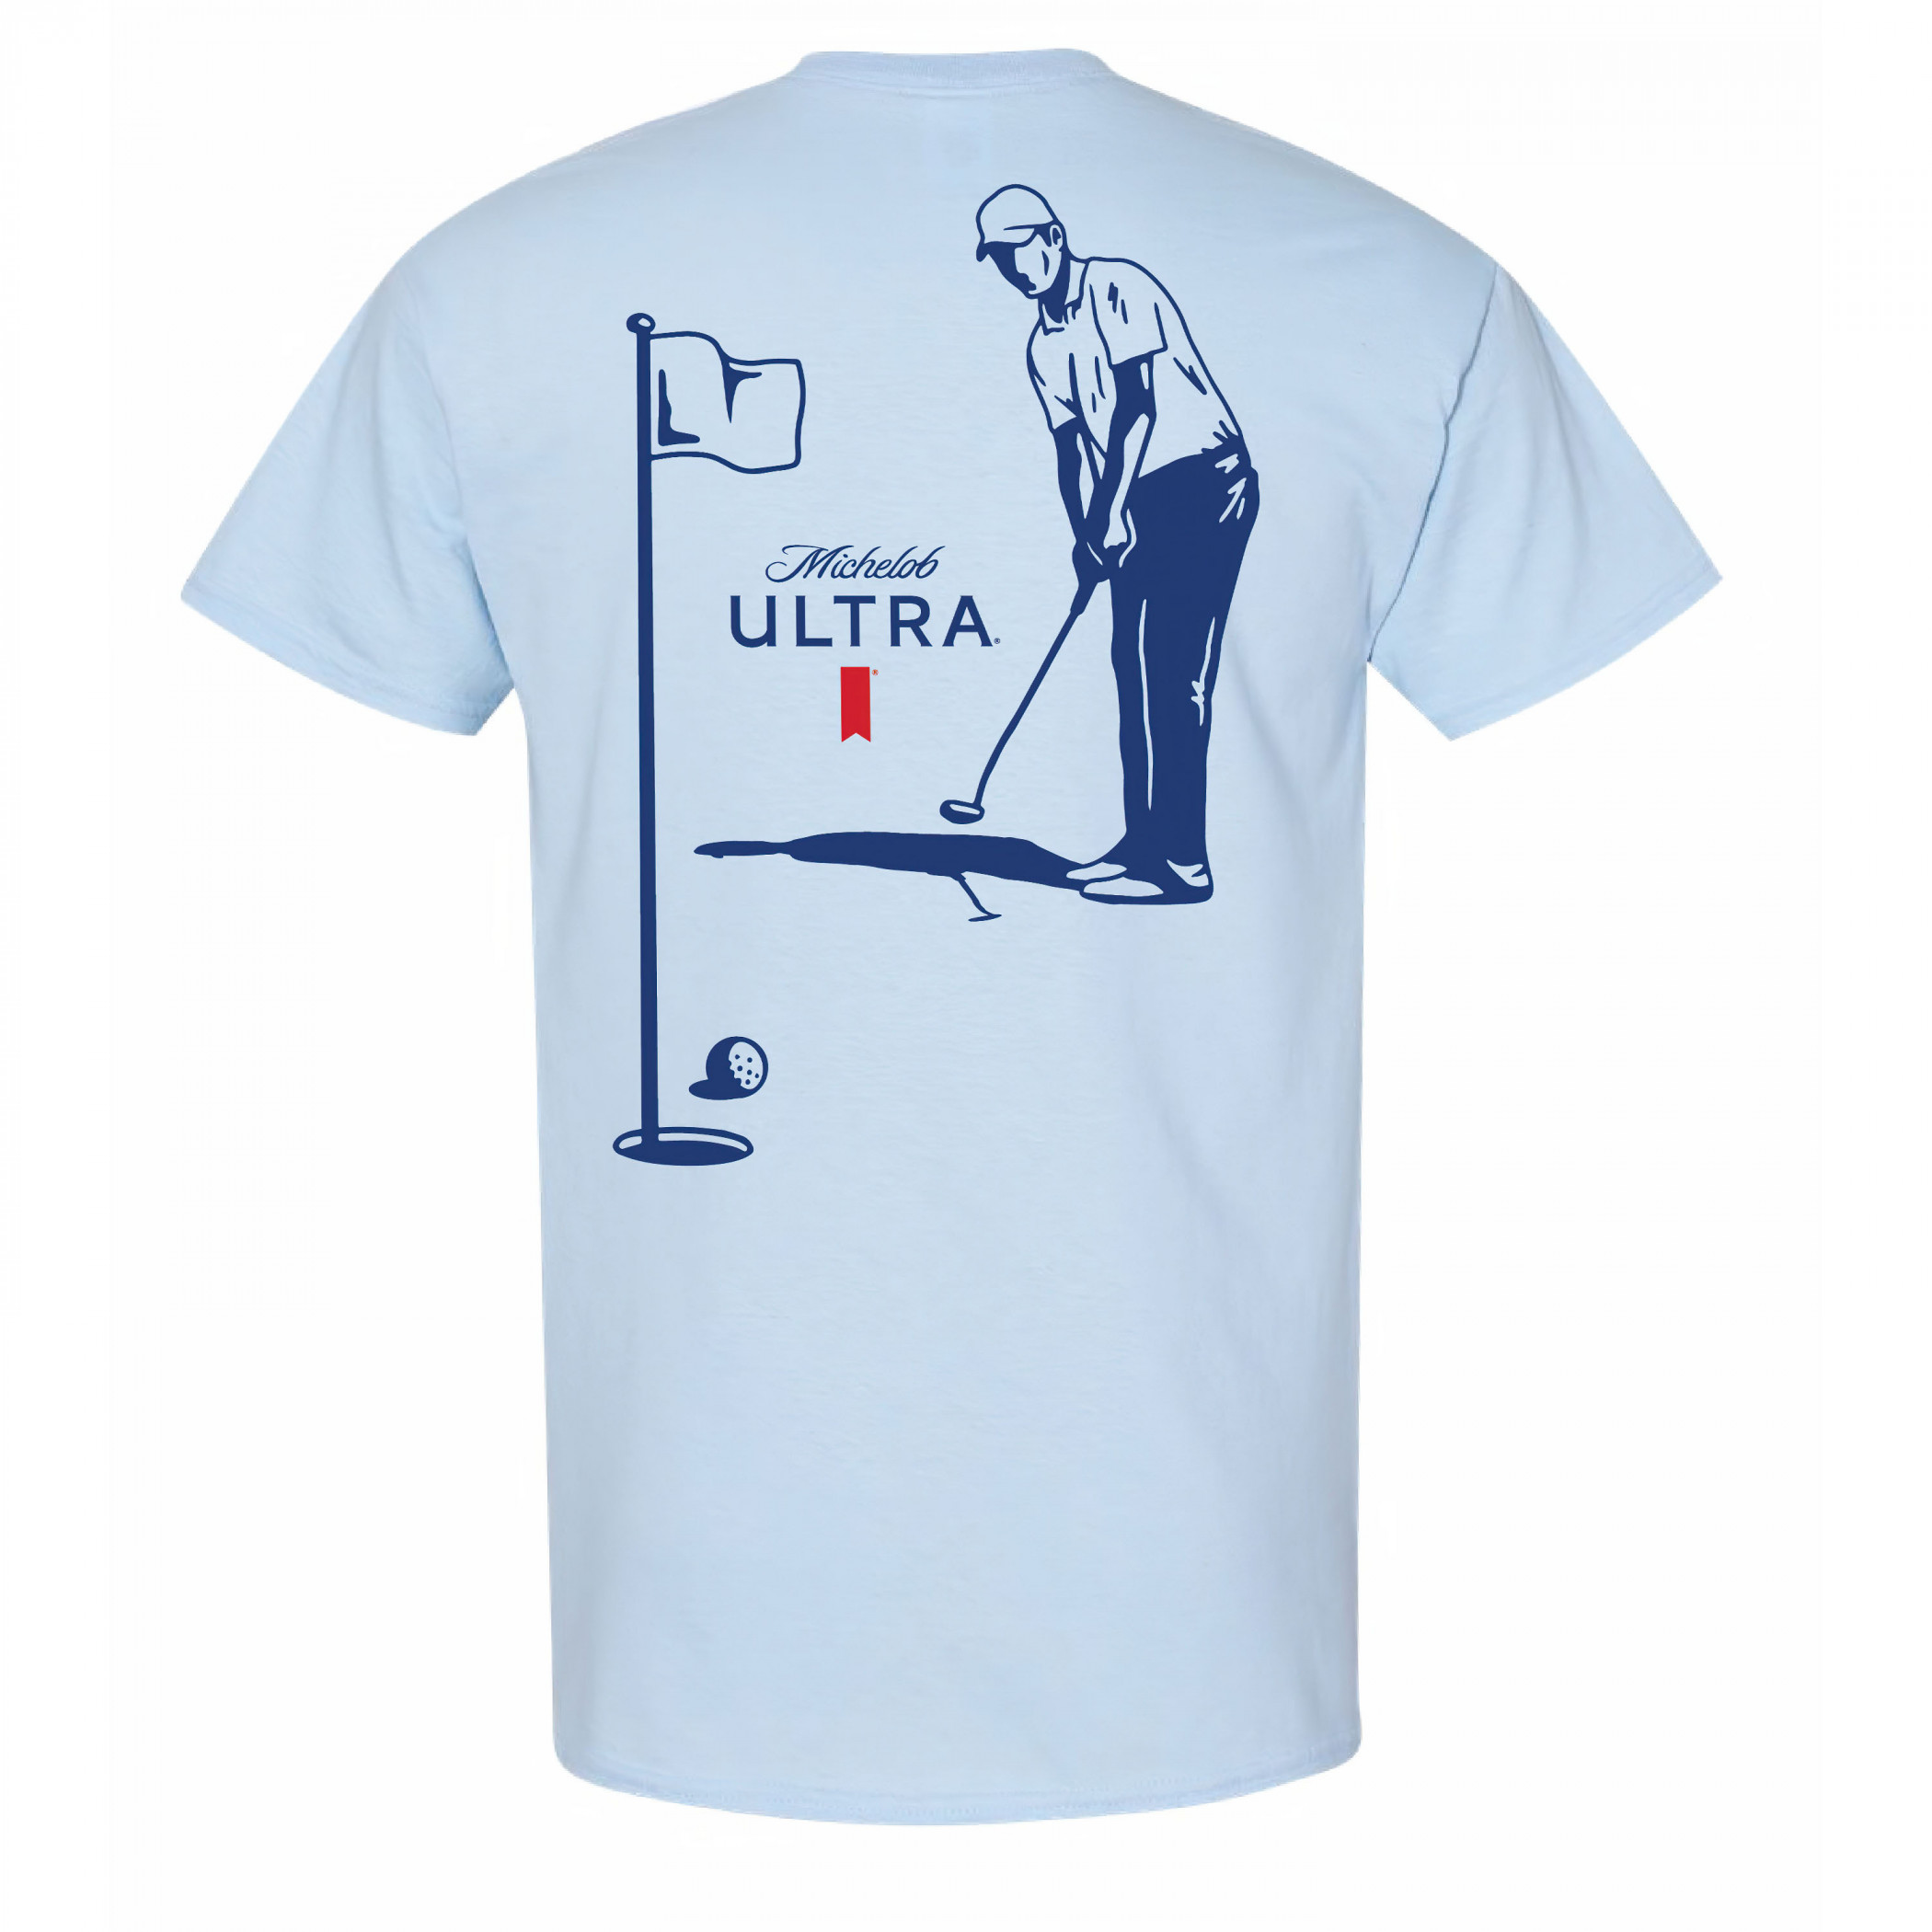 Michelob Ultra Golfing Blue Colorway Front and Back Print T-Shirt